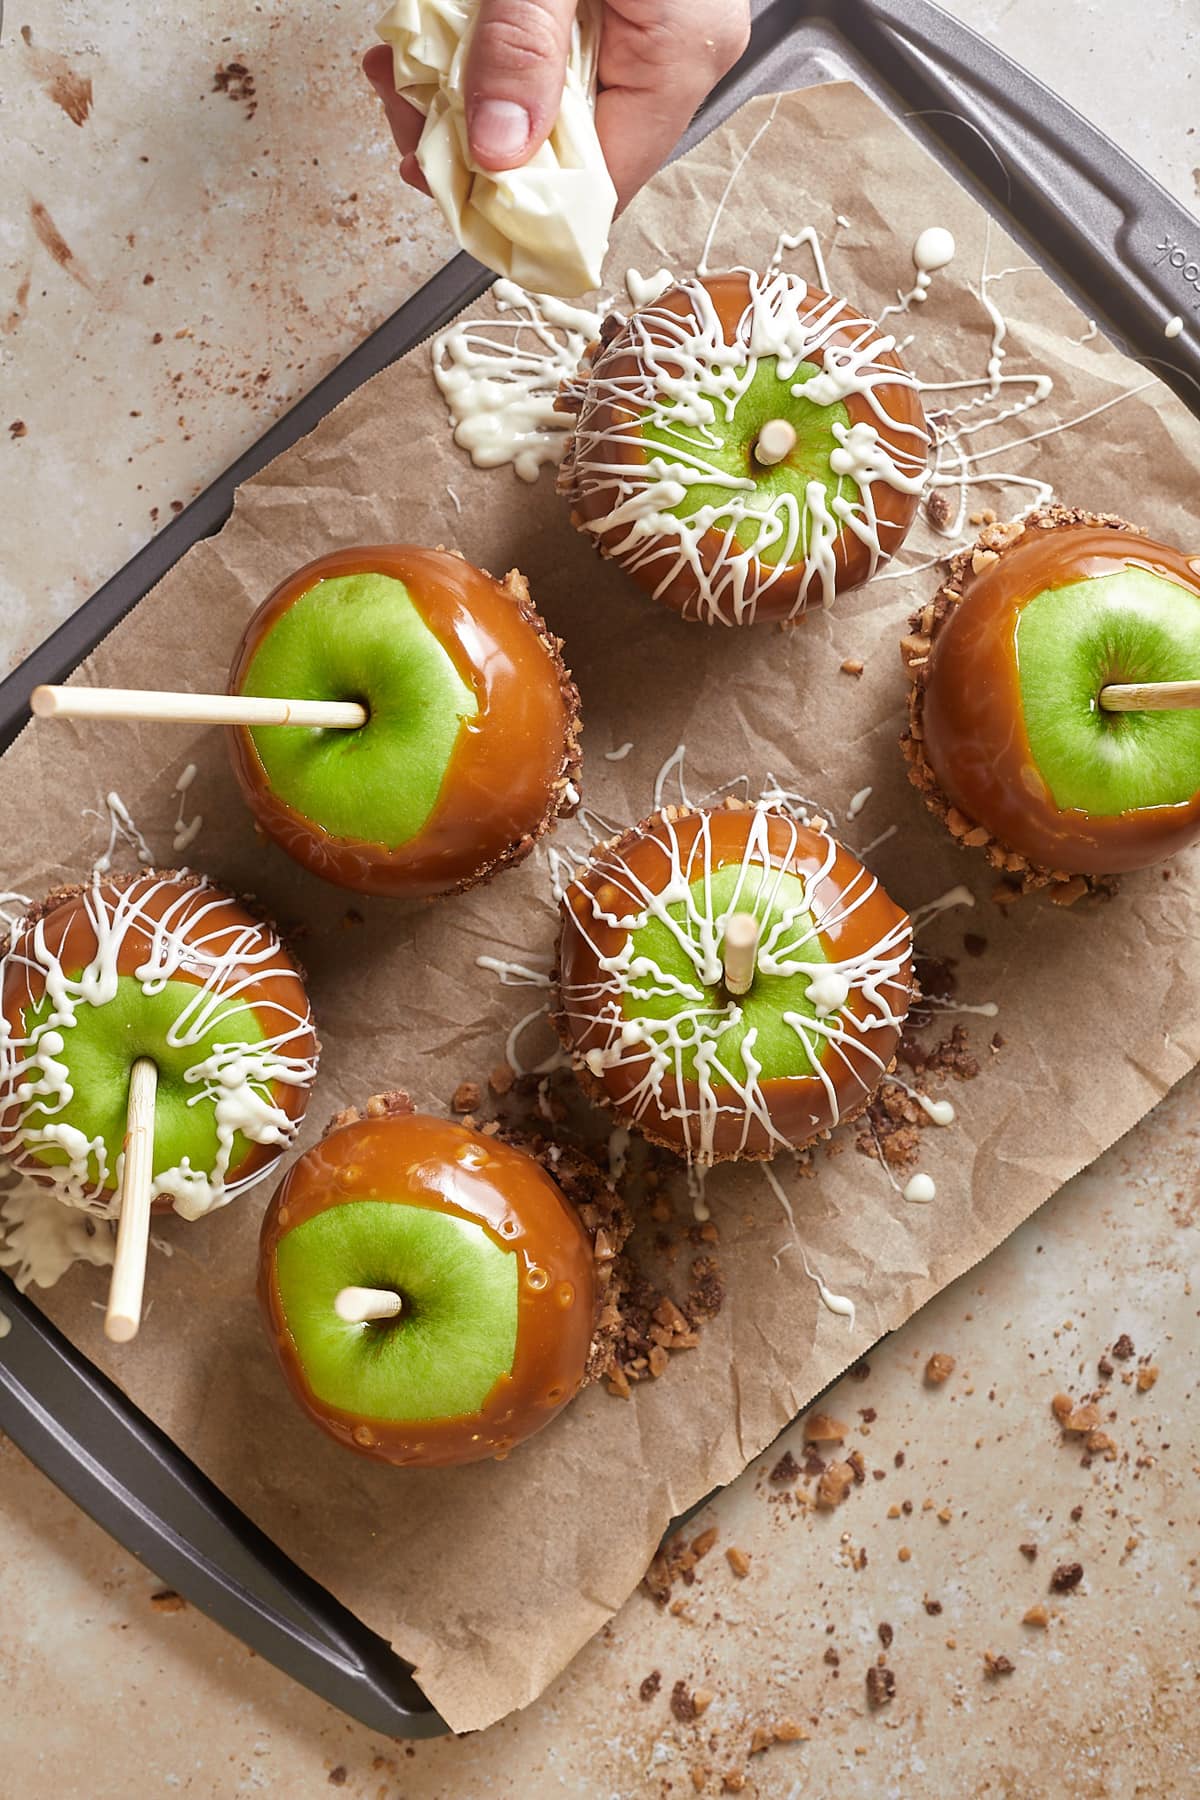 Overhead view of caramel apples on parchment paper